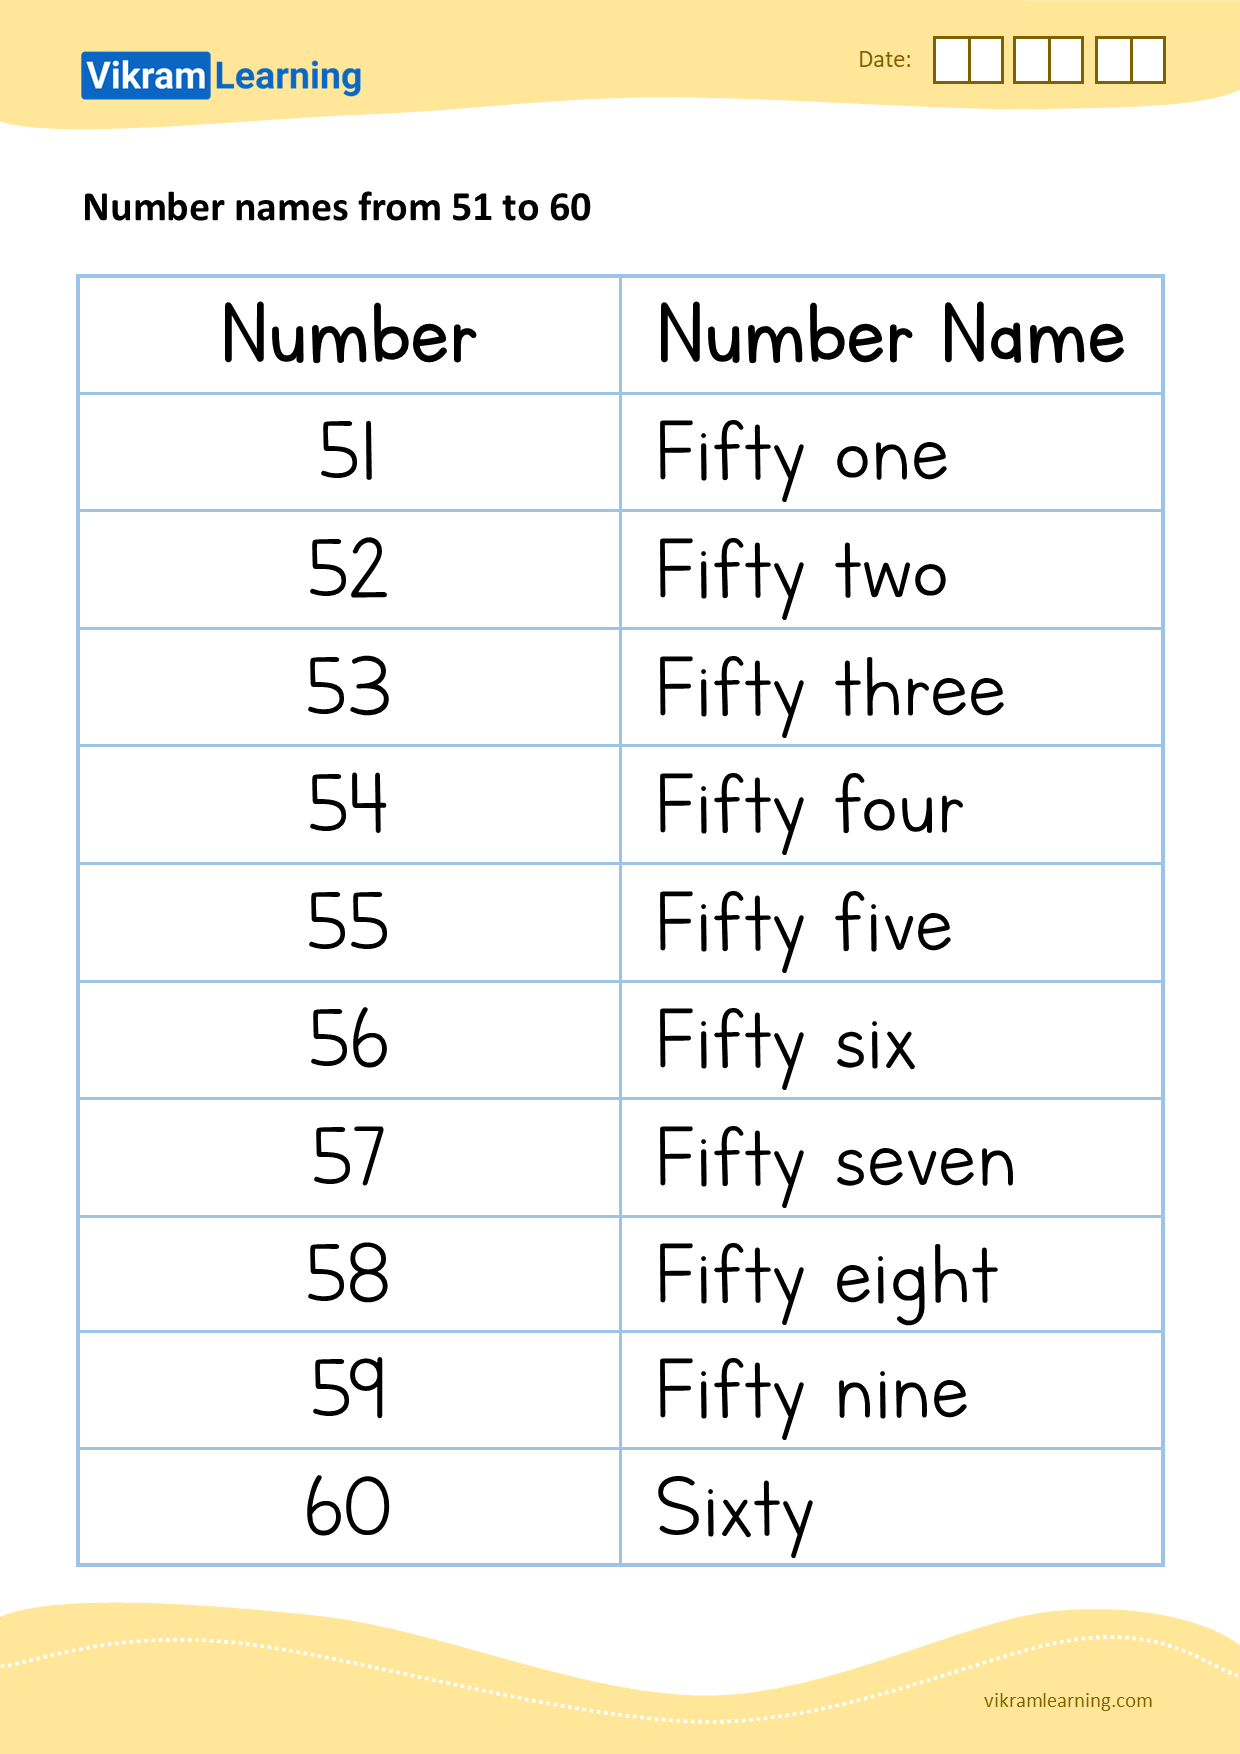 download-number-names-from-51-to-60-worksheets-vikramlearning